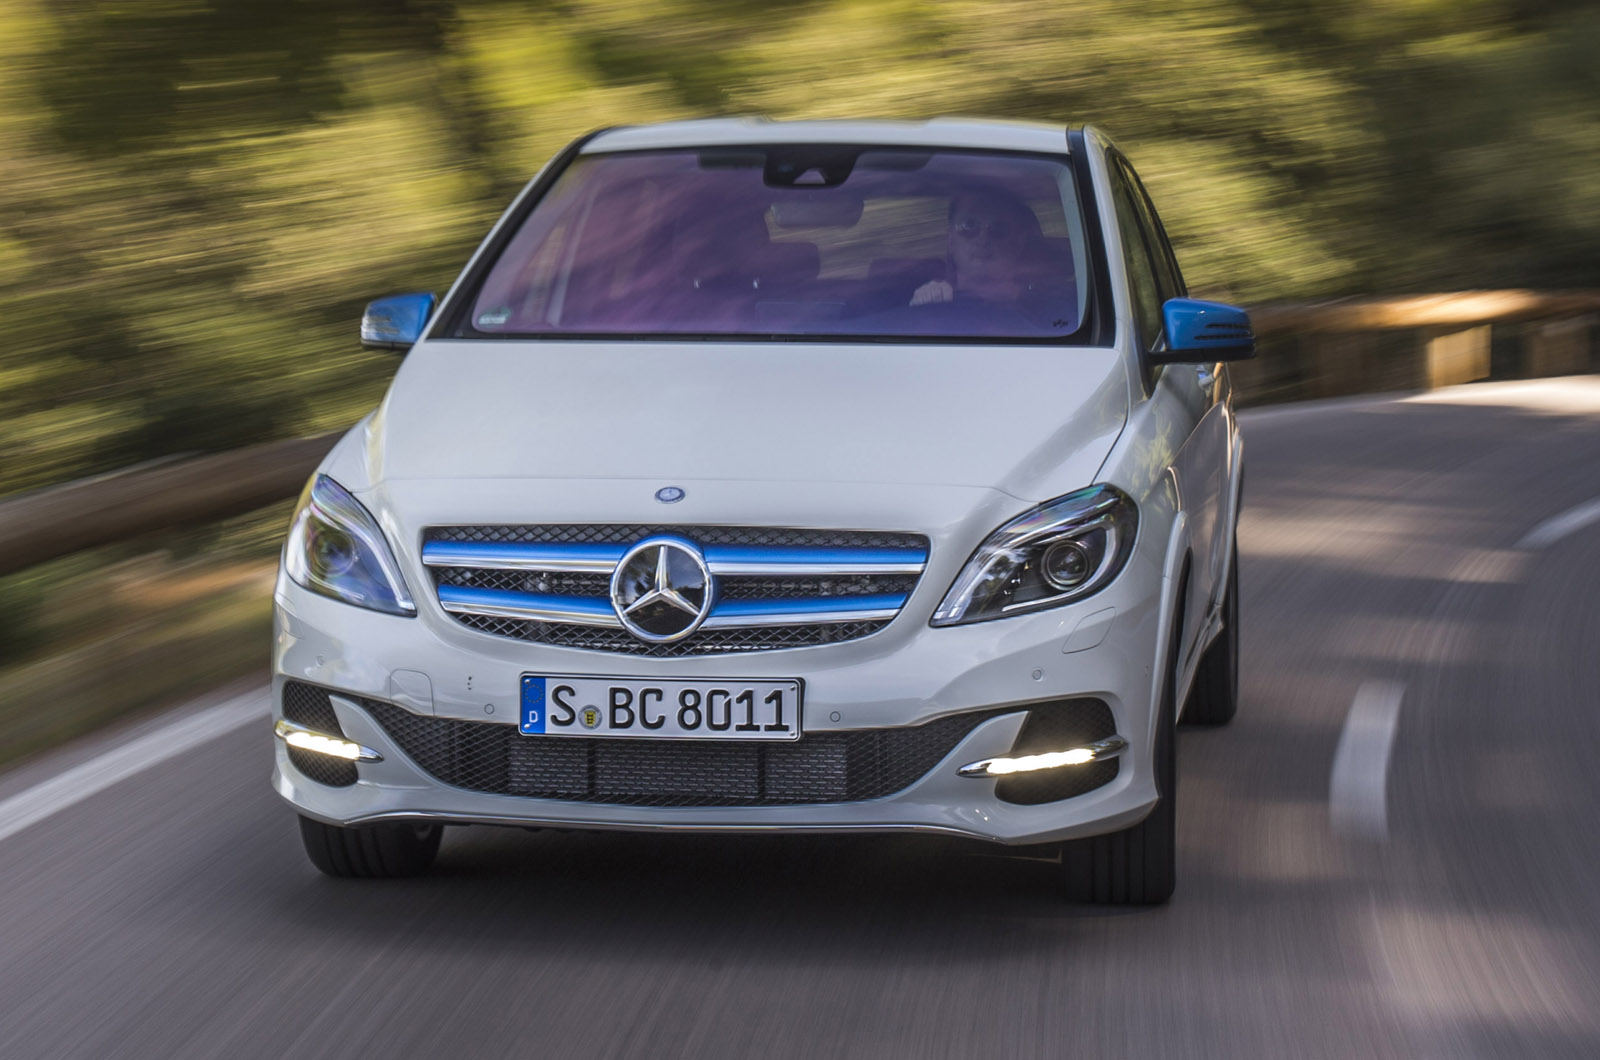 Mercedes-Benz B Class Electric Drive News and Reviews